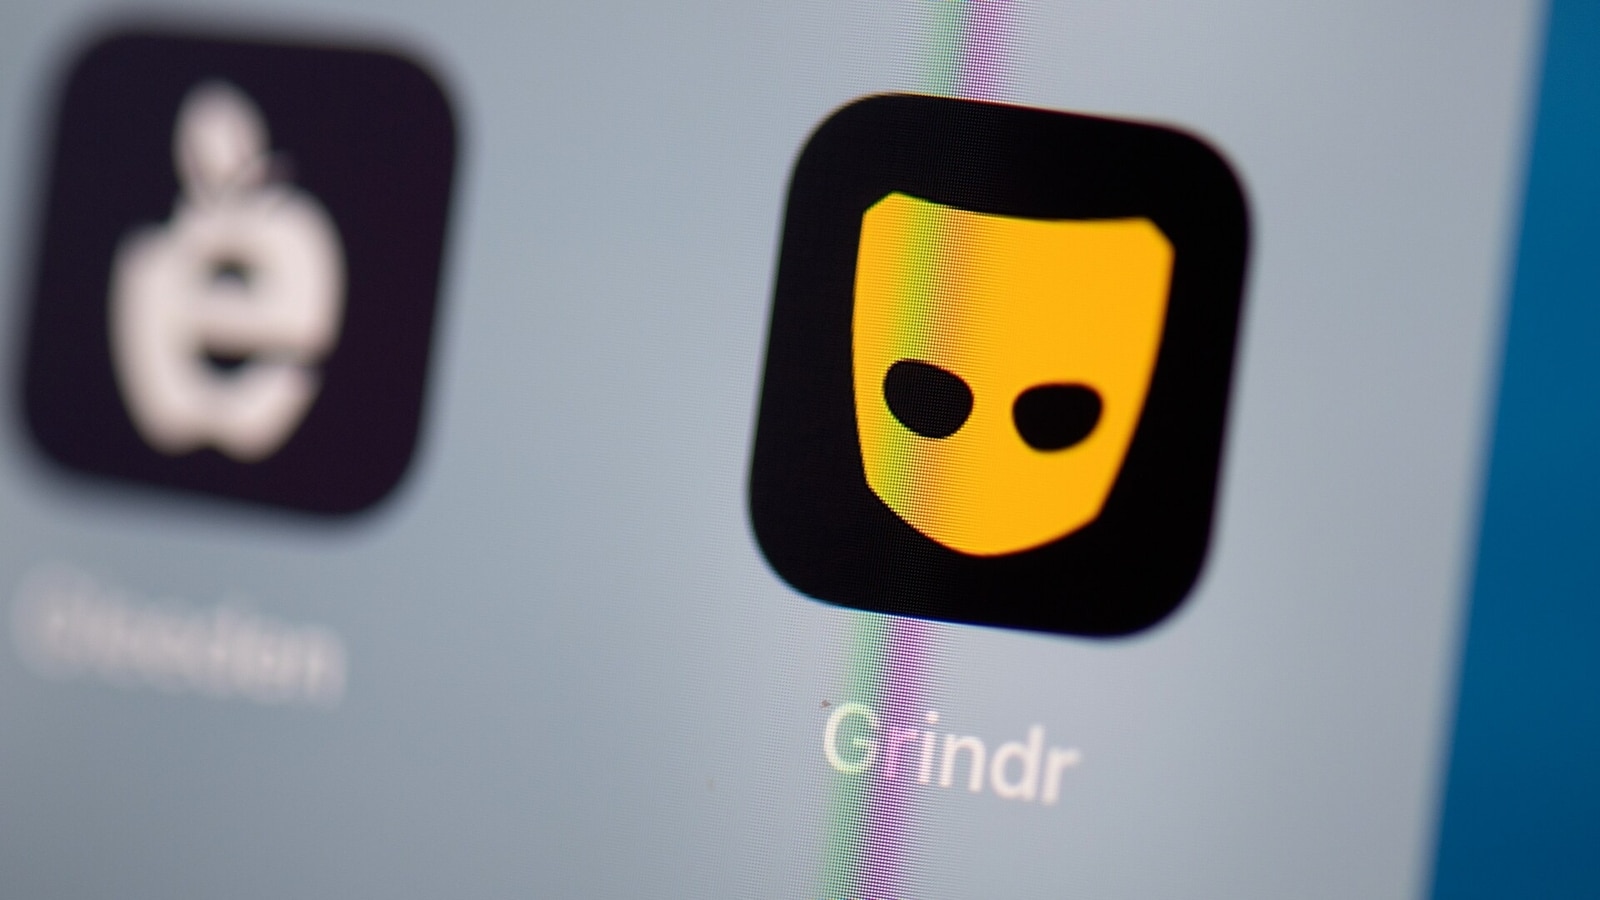 Grindr Loses Nearly Half Its Staff to Strict RTO Rule